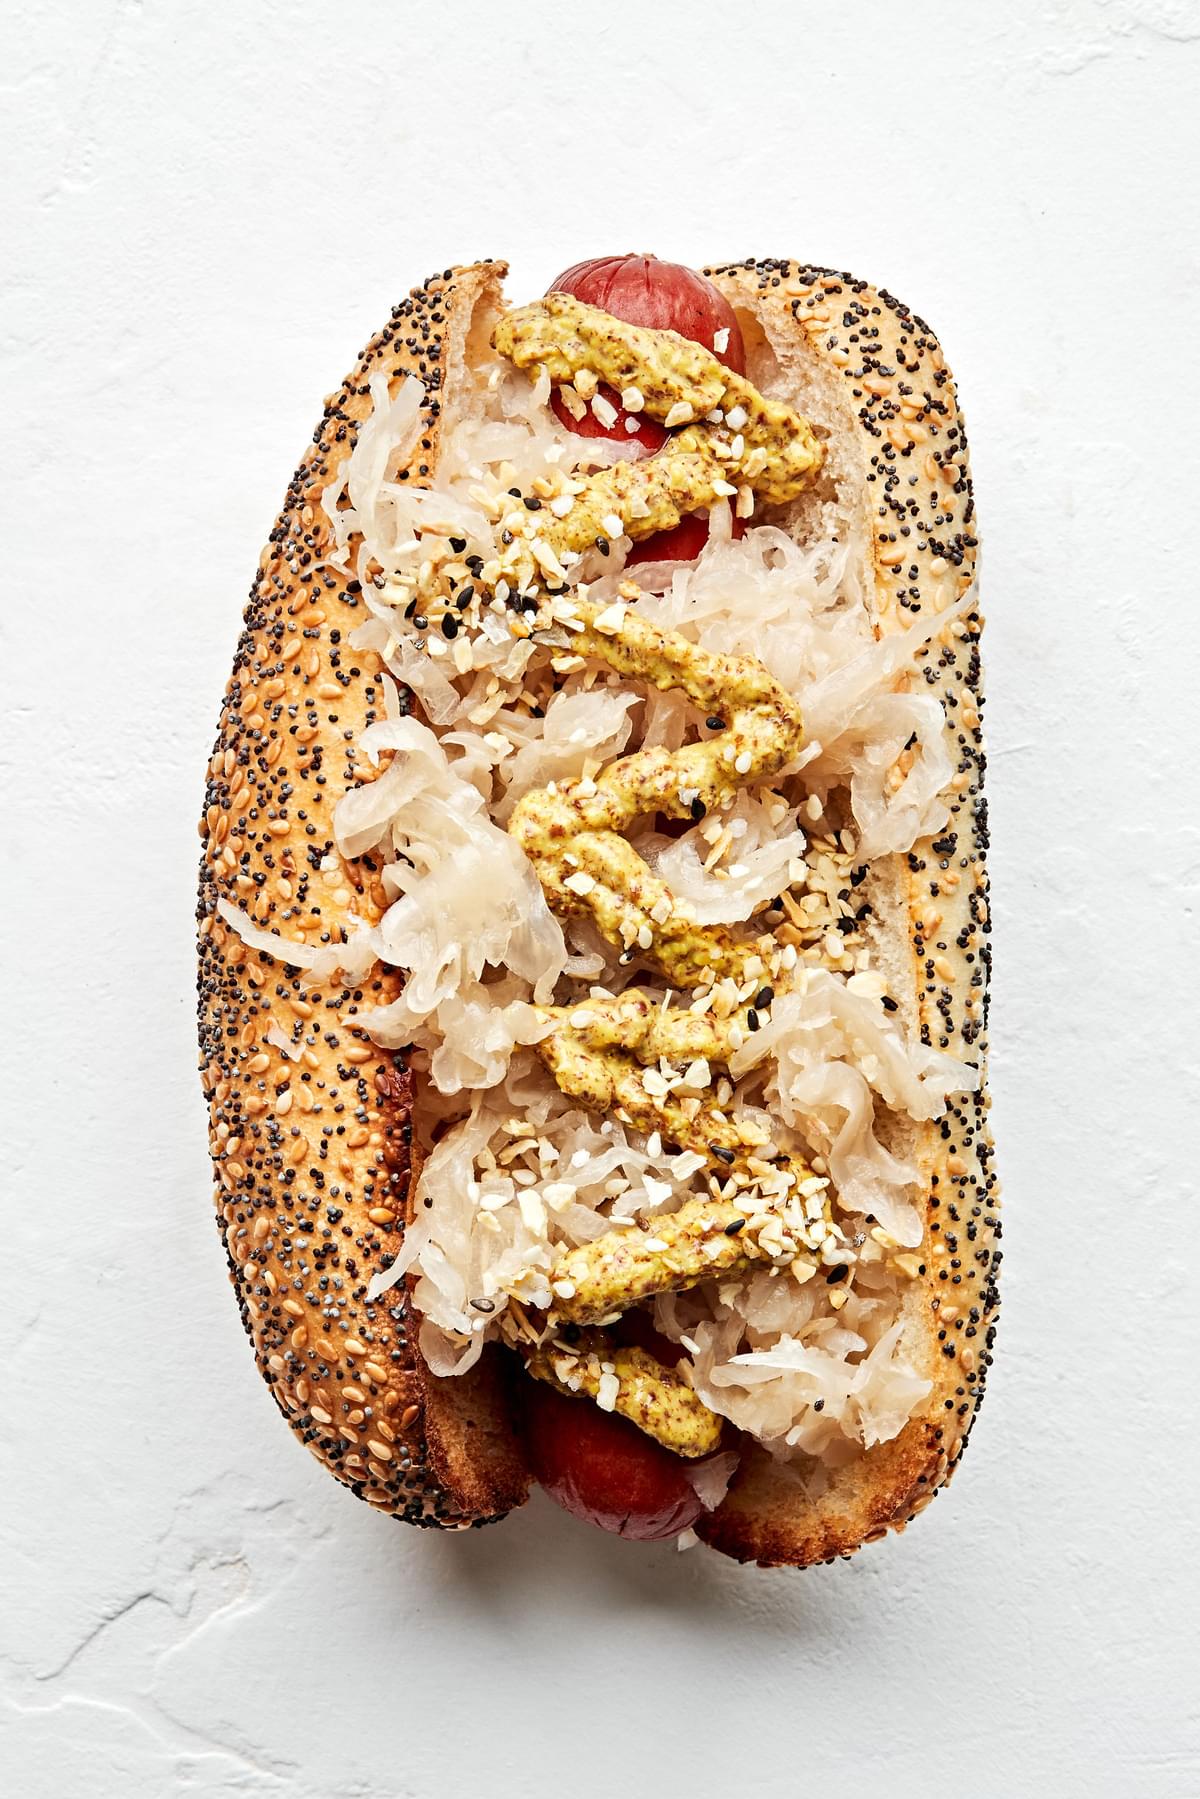 A Deli style hot dog topped with sauerkraut, curry mustard and everything bagel seasoning.